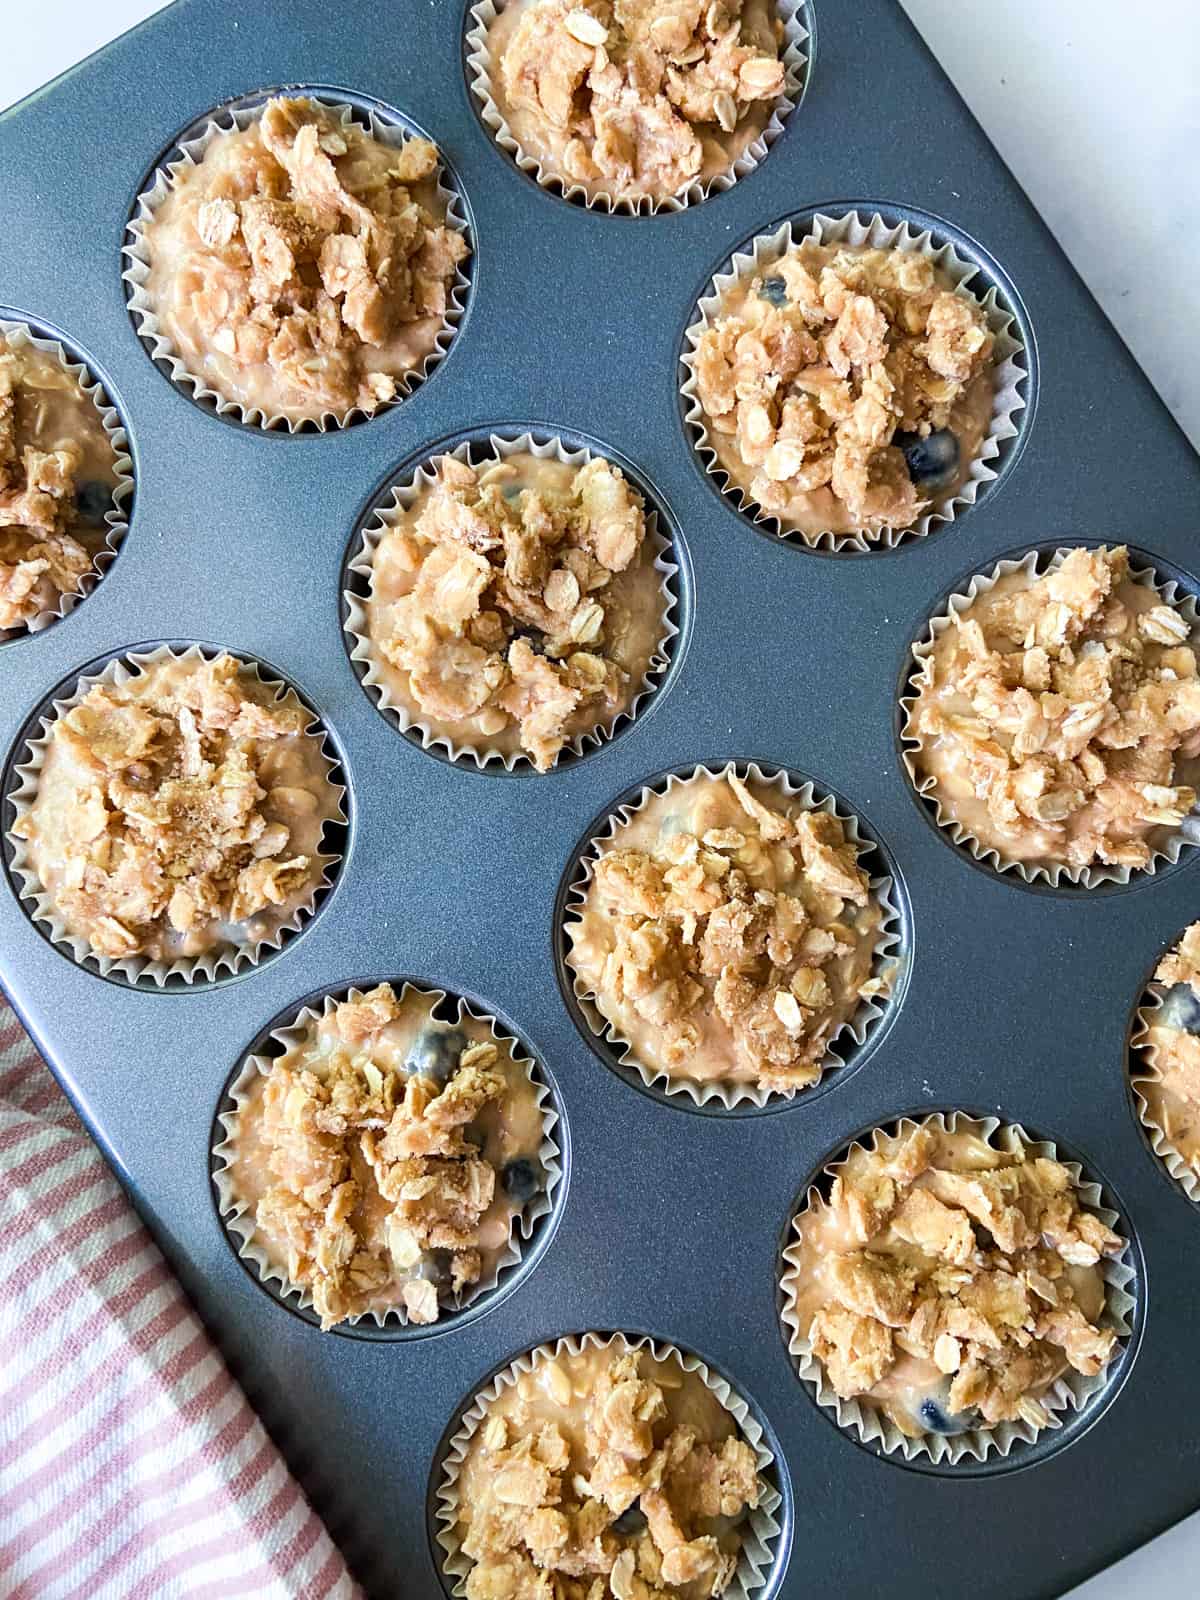 Unbaked muffins with streusel in a muffin tin.